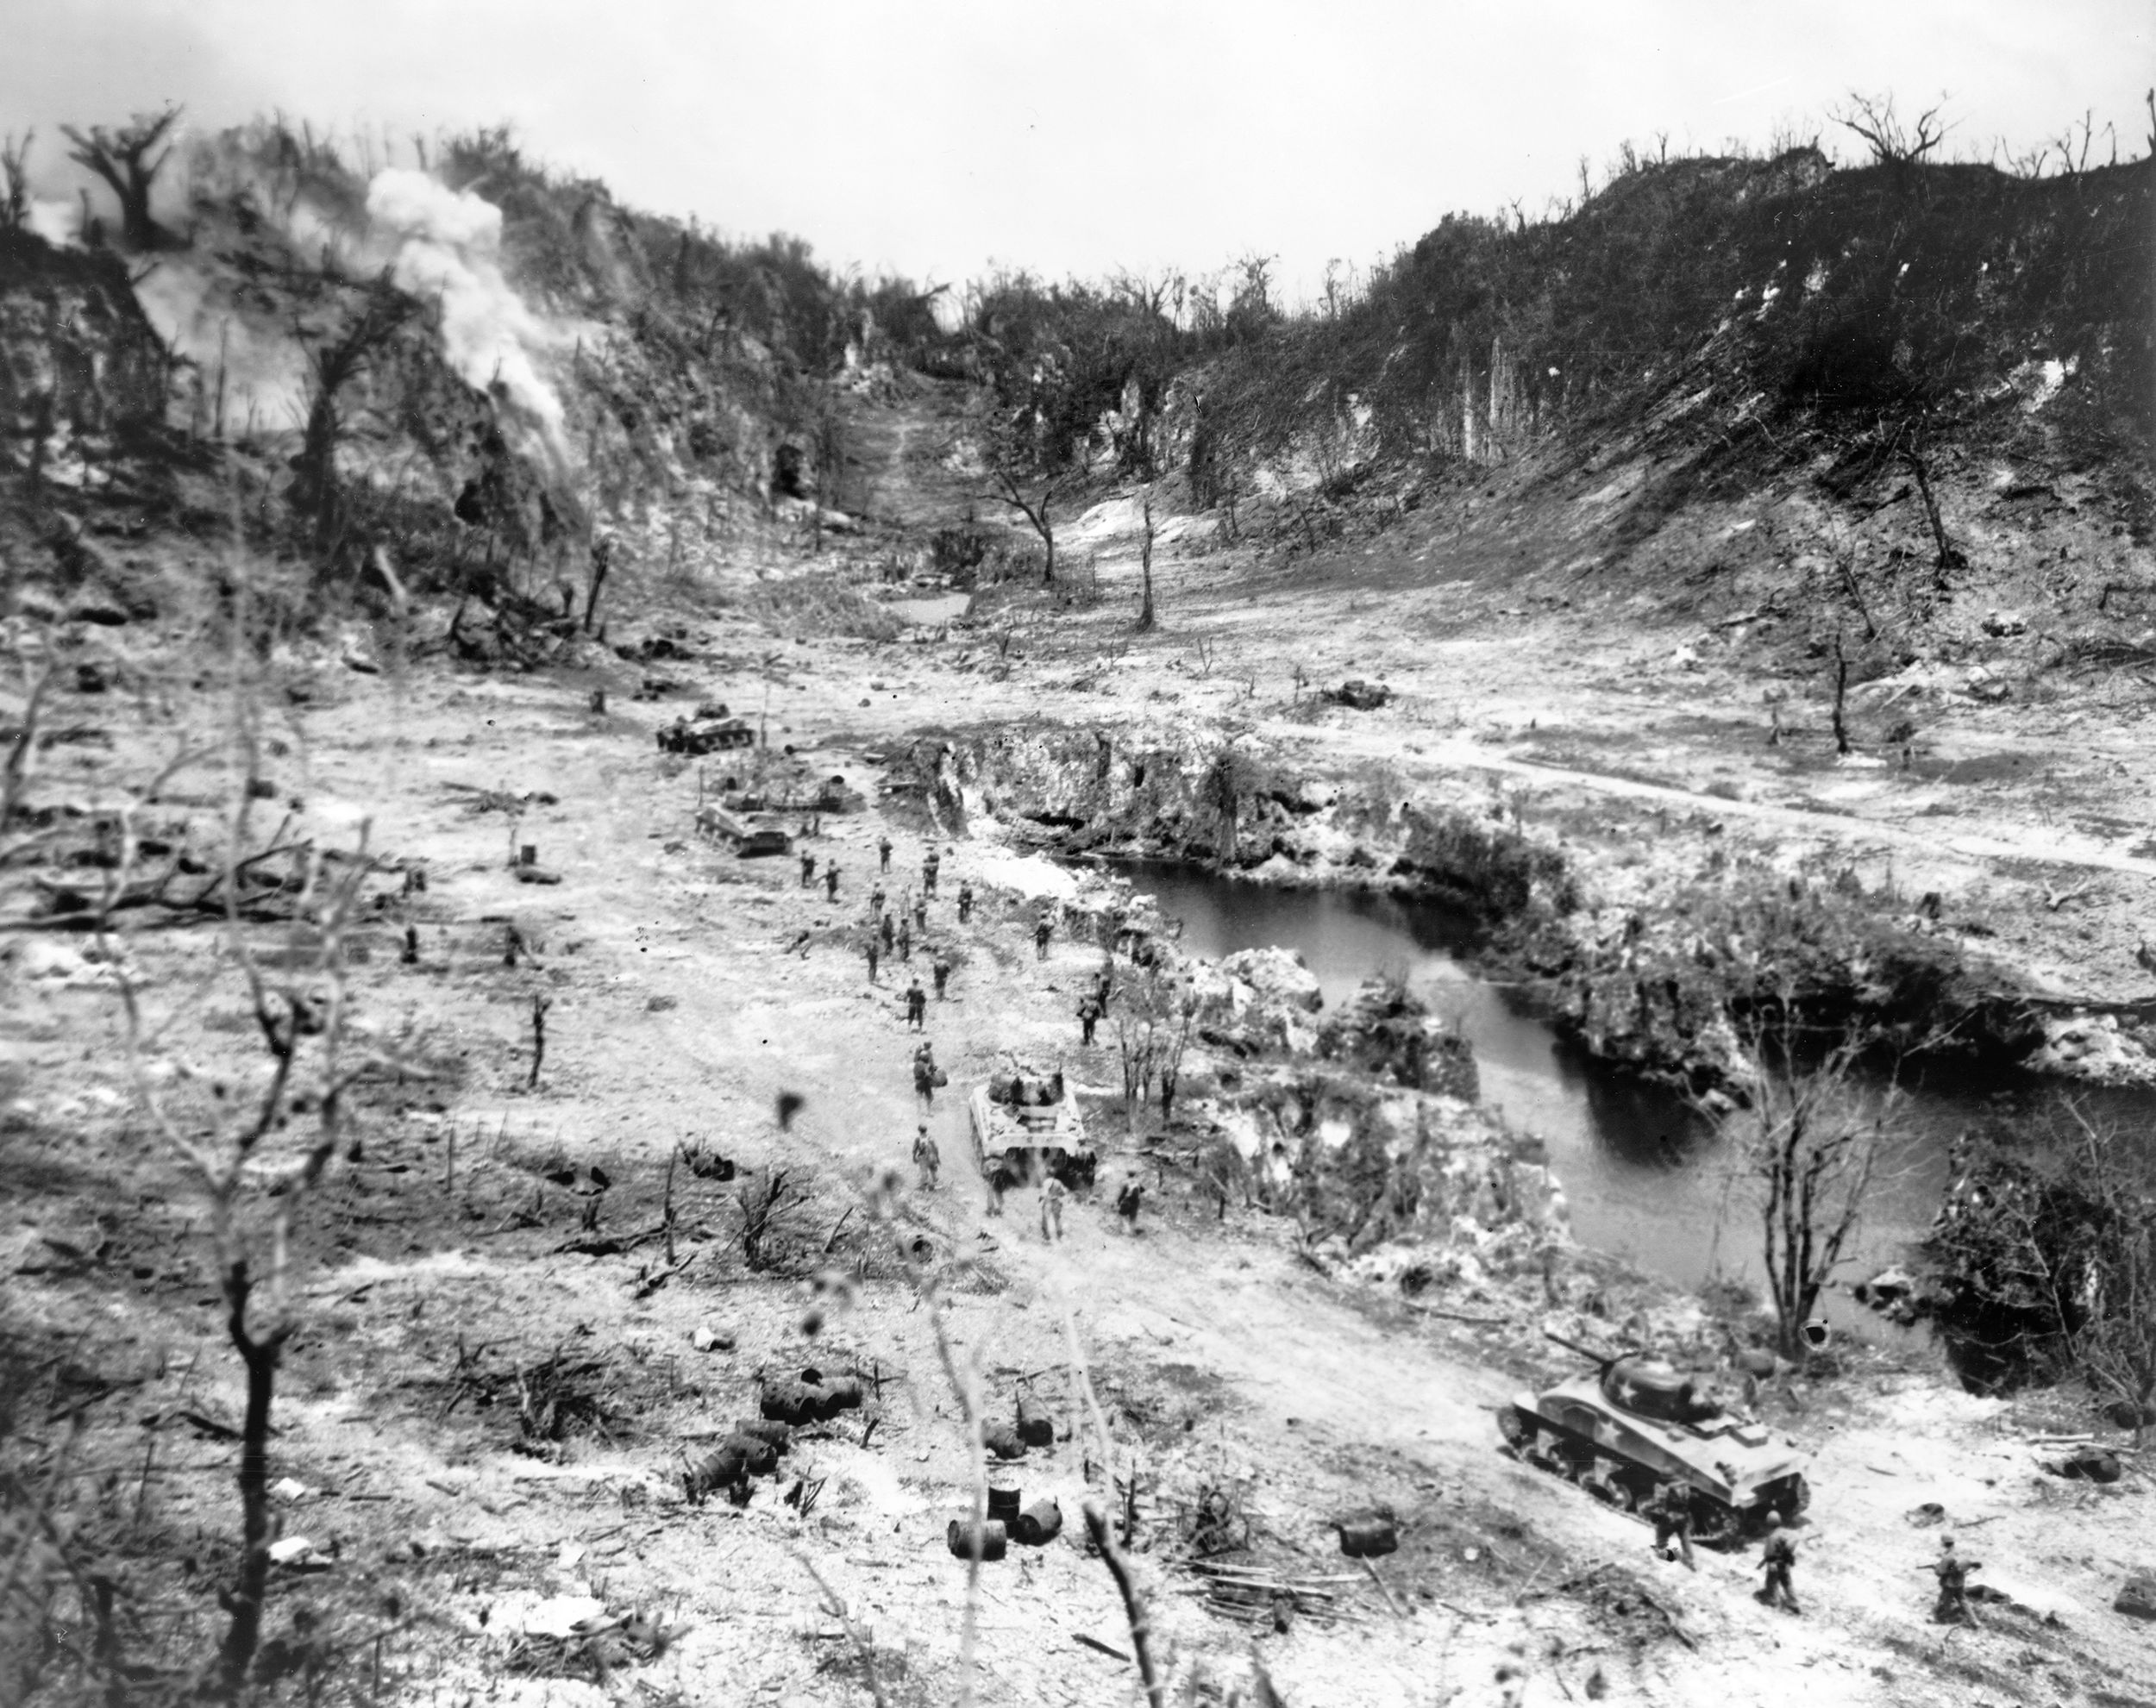 Marine riflemen and tanks in the Horseshoe Ridge area of Peleliu's Umurbrogol massif pass the island’s only source of fresh water. The rugged terrain and fortified tunnels meant that the fight for the Umurbrogol Pocket, taken over by the 7th Marines and the Army’s 81st Division, would last more than two months.